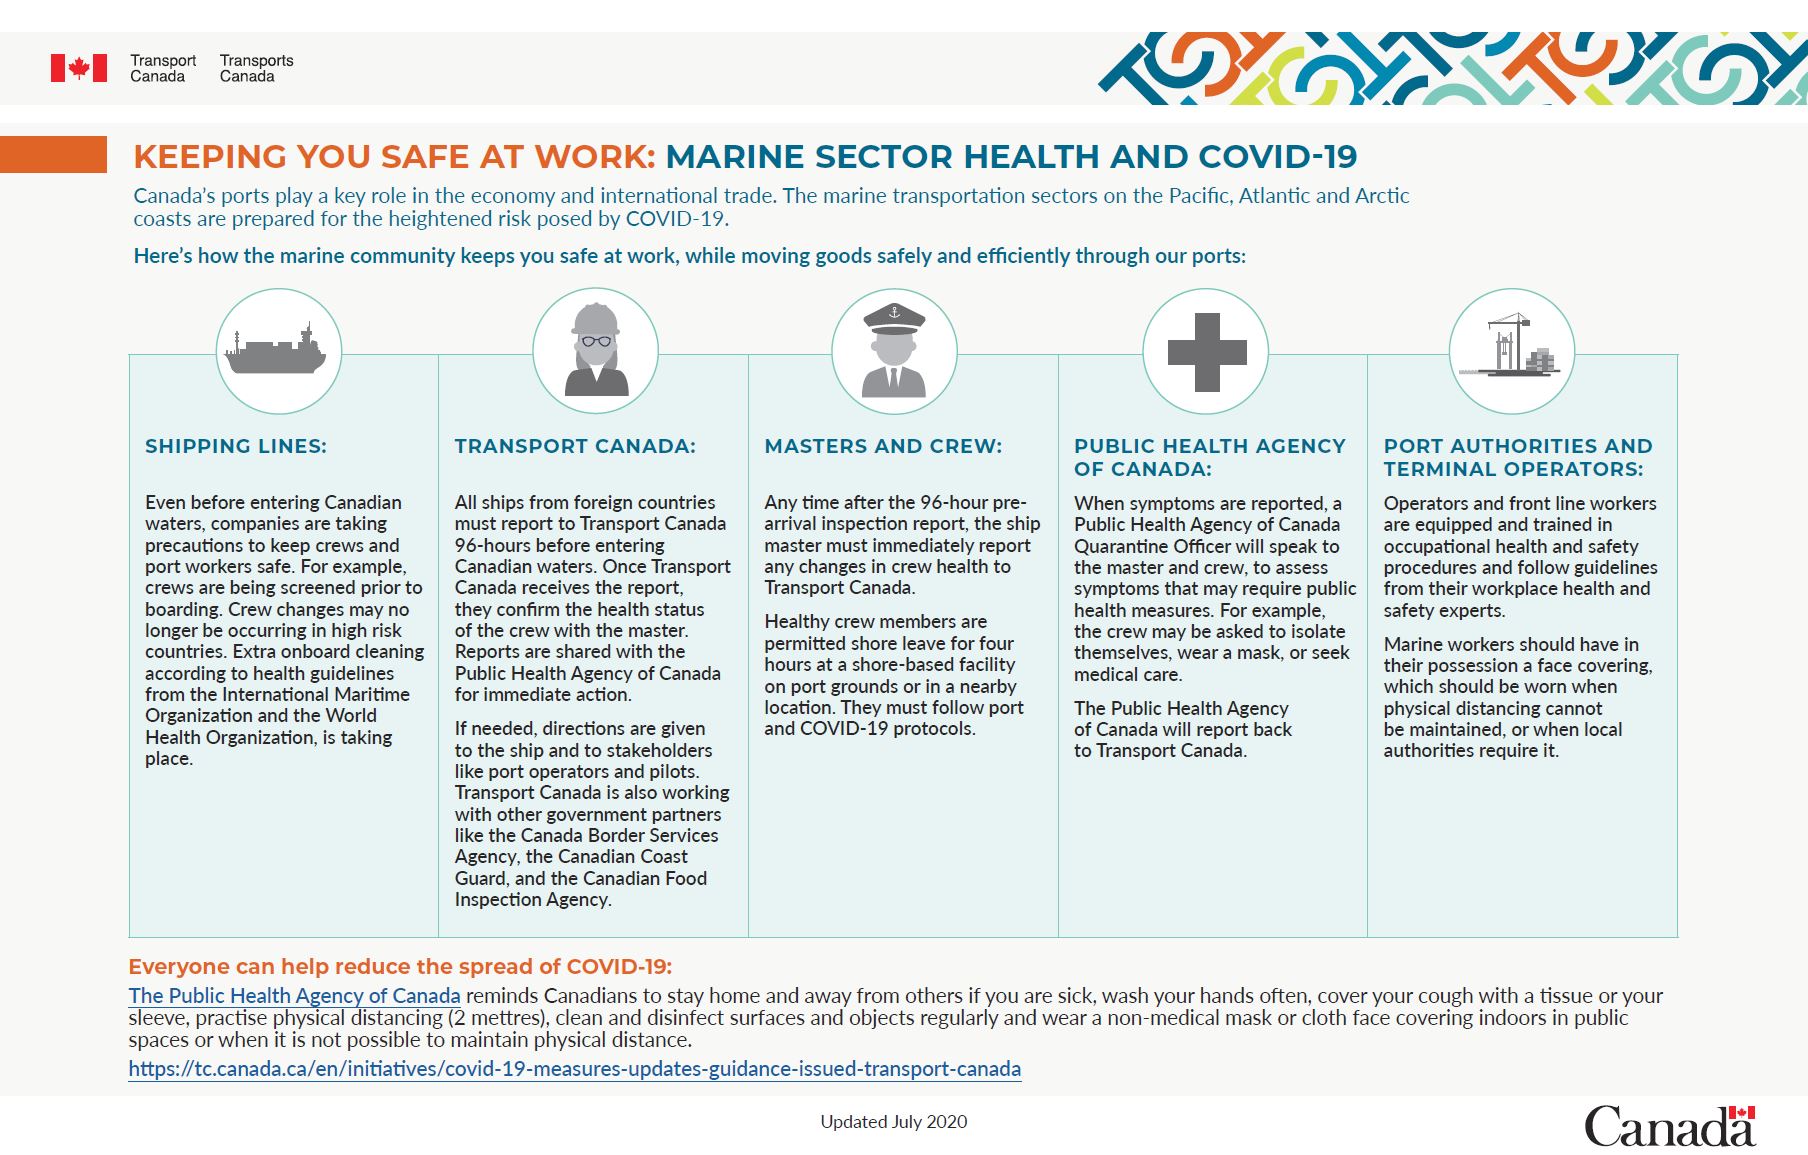 COVID-19 guidance posters for marine transportation